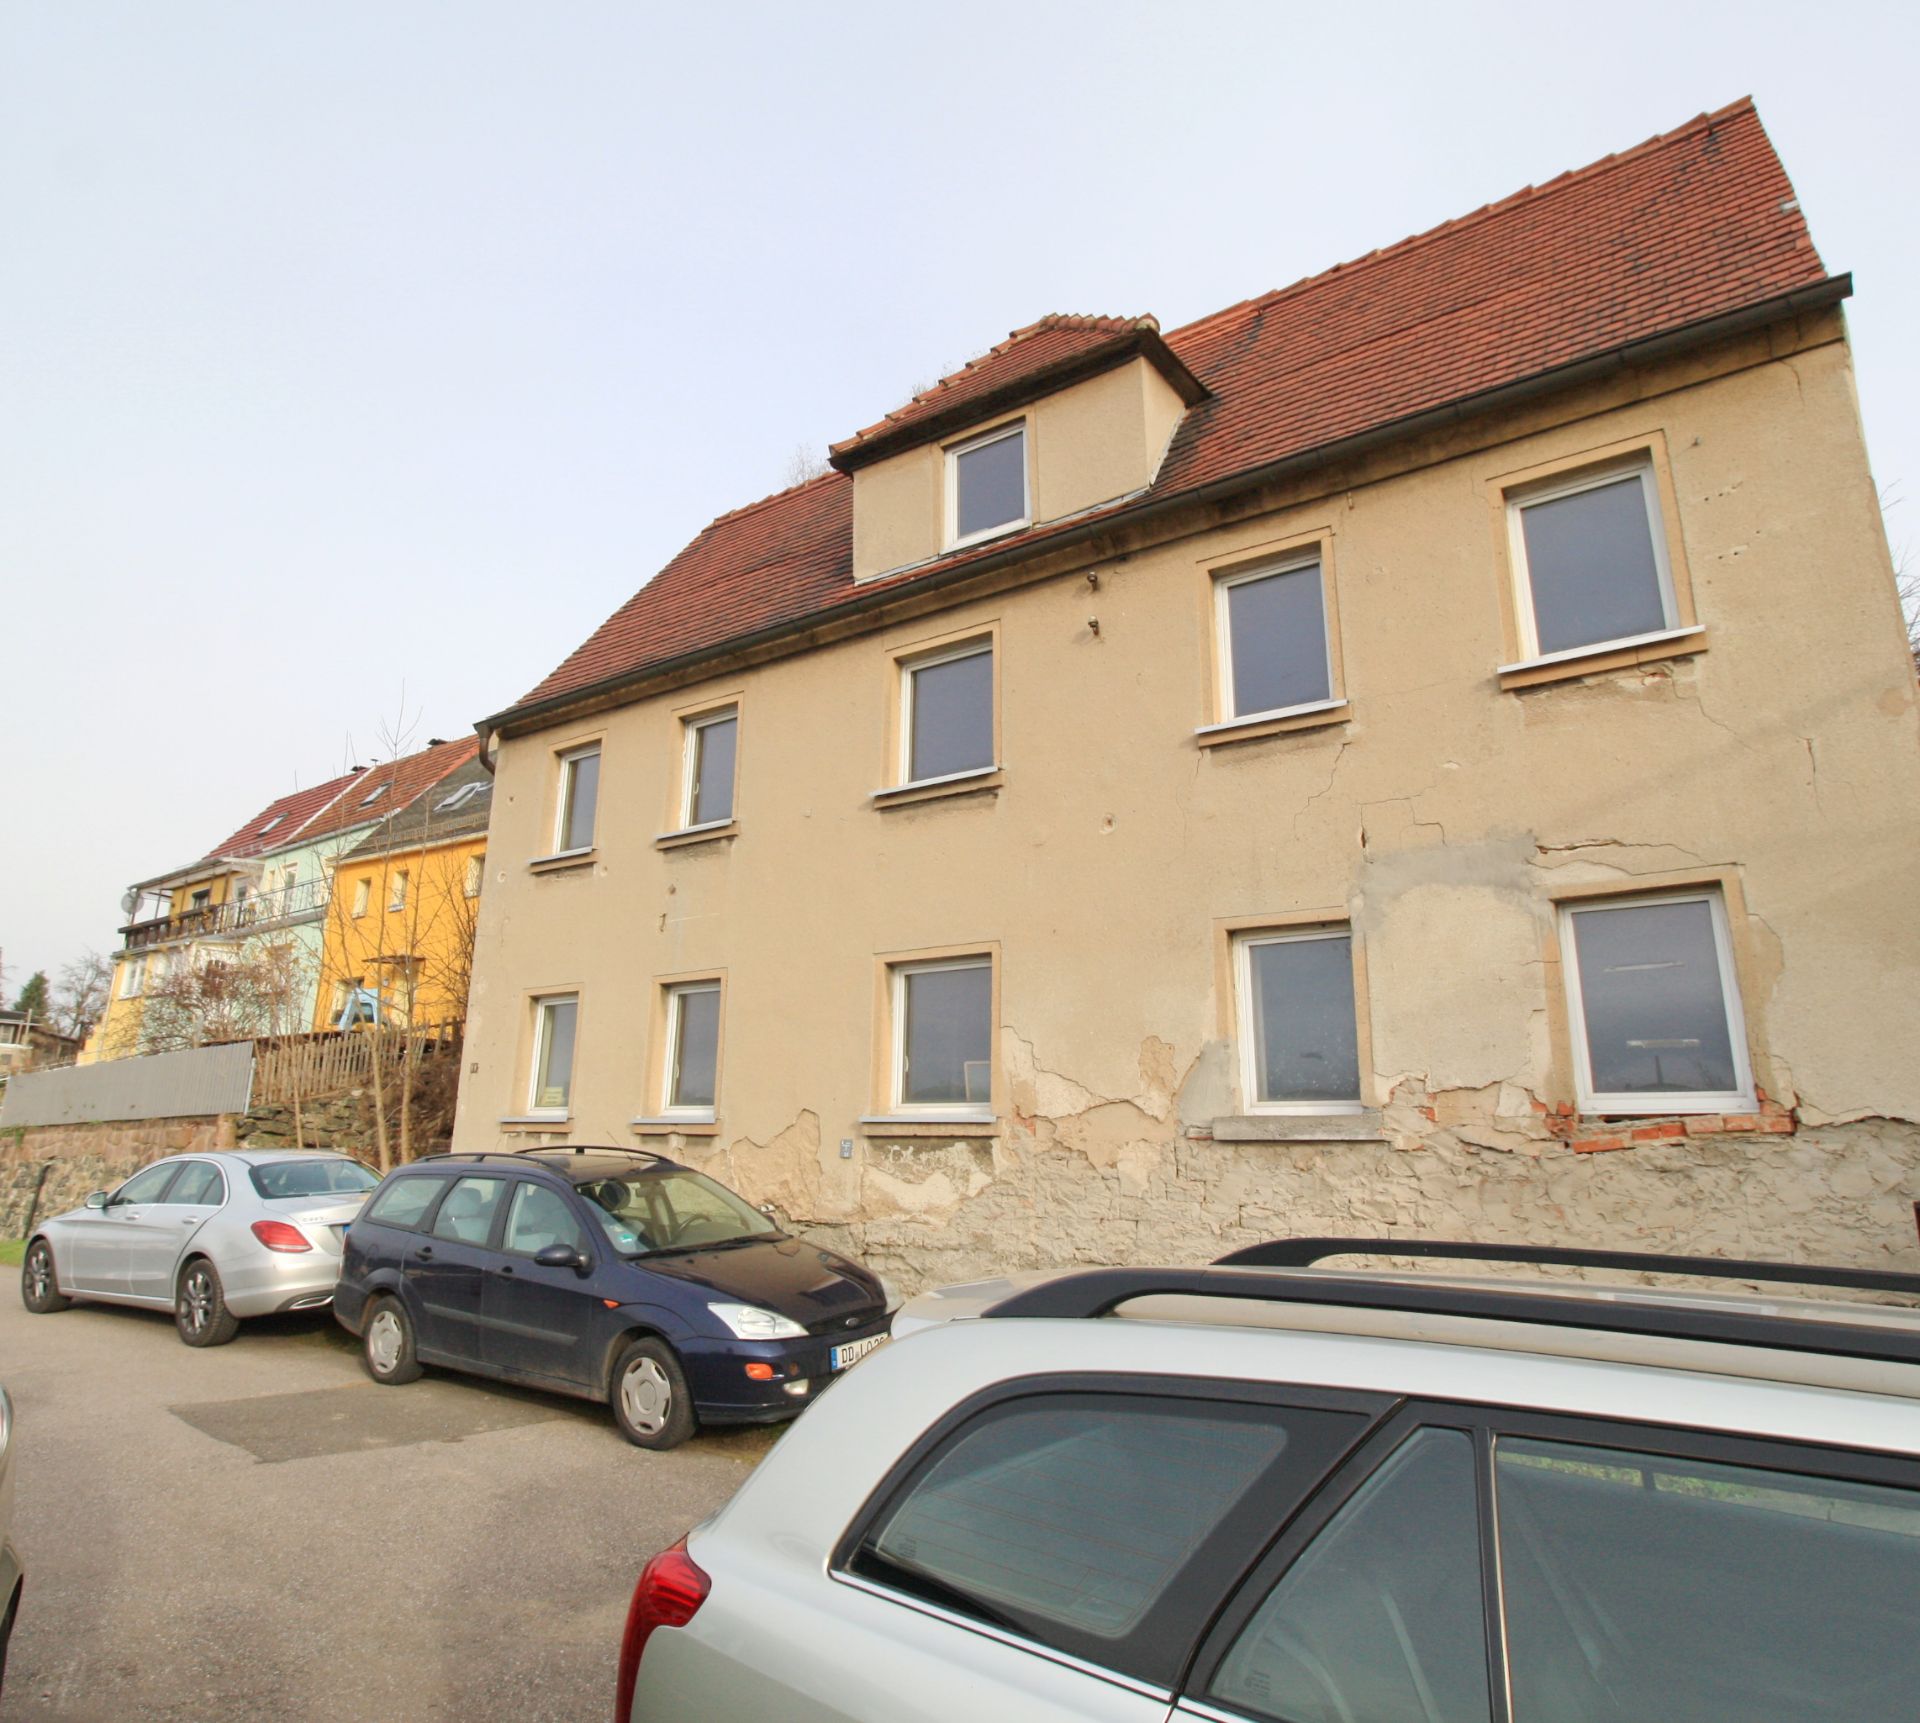 FREEHOLD MULTI APARTMENT BLOCK IN THE HISTORIC TOWN OF HAINICHEN, GERMANY - Image 3 of 51